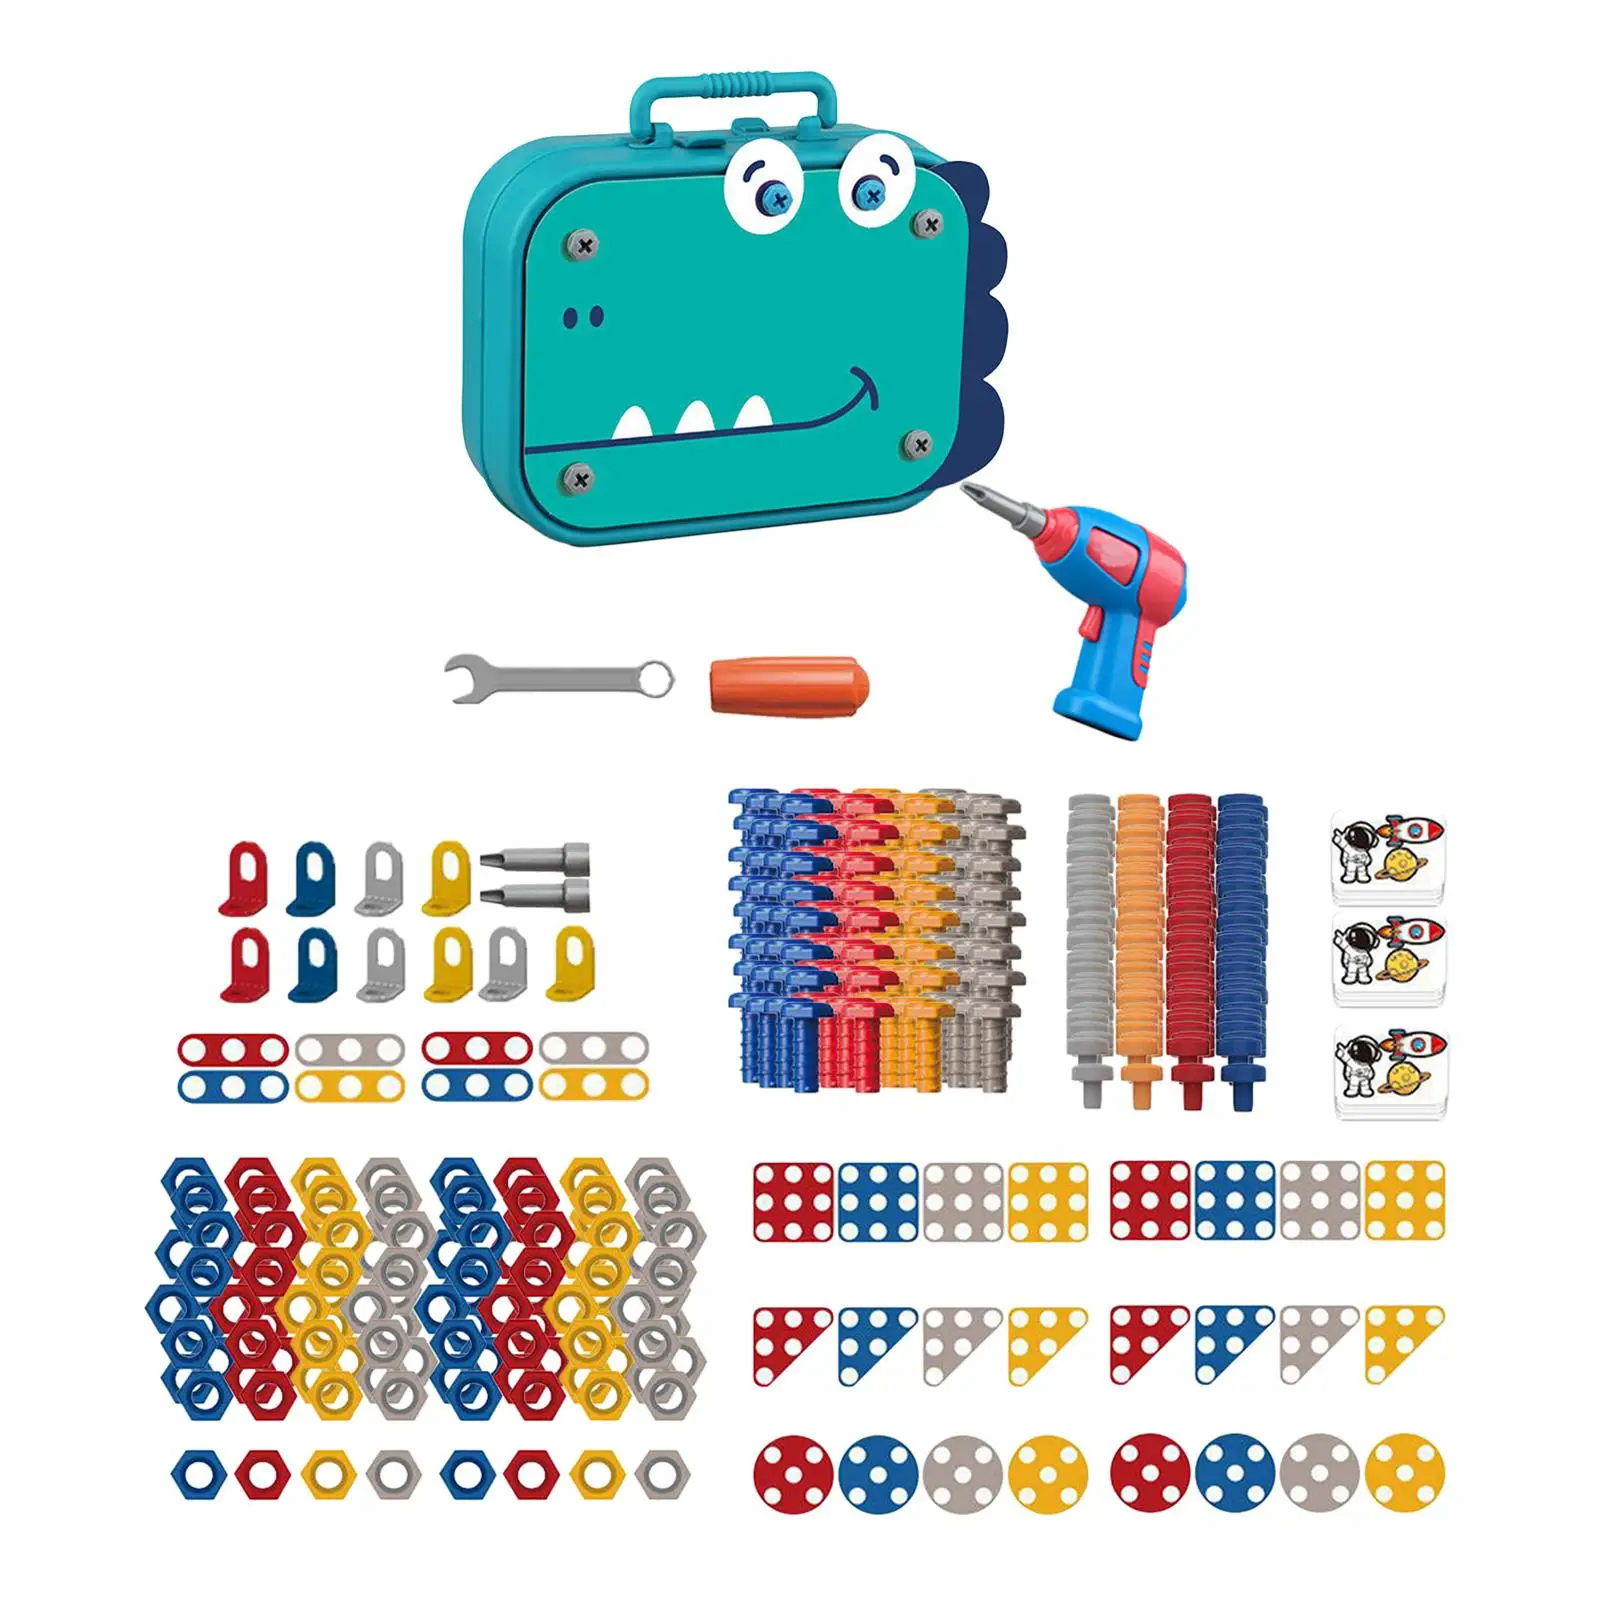 Drill and Screwdriver Toy Set Shapes Matching DIY Kids Nut and Bolts Toy Birthday Gift Problem Solving Coordination Imagination